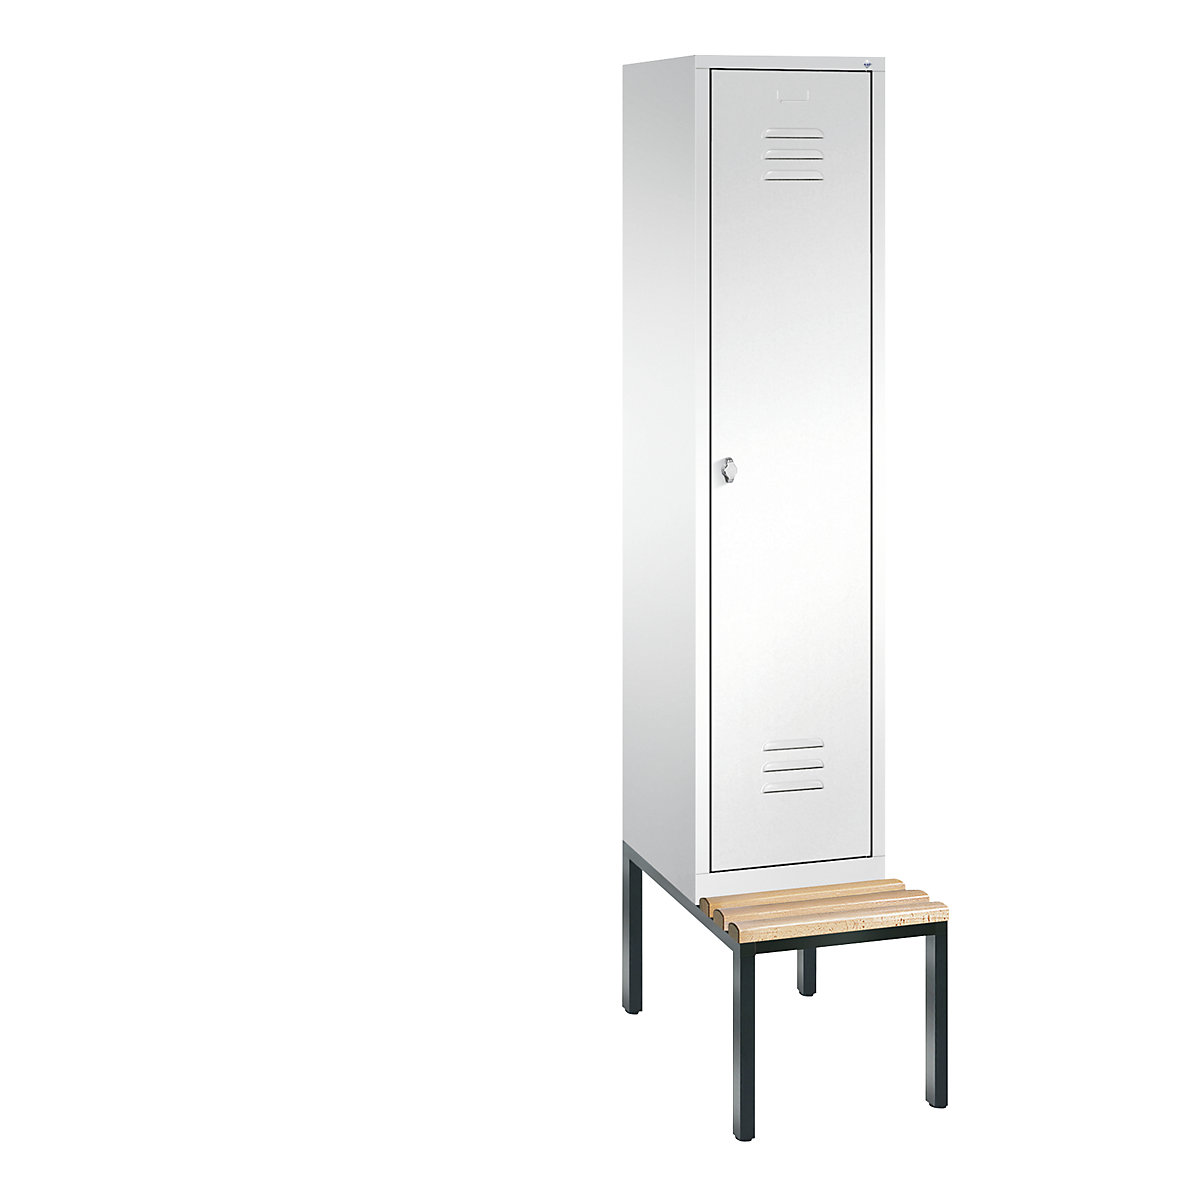 CLASSIC cloakroom locker with bench mounted underneath - C+P